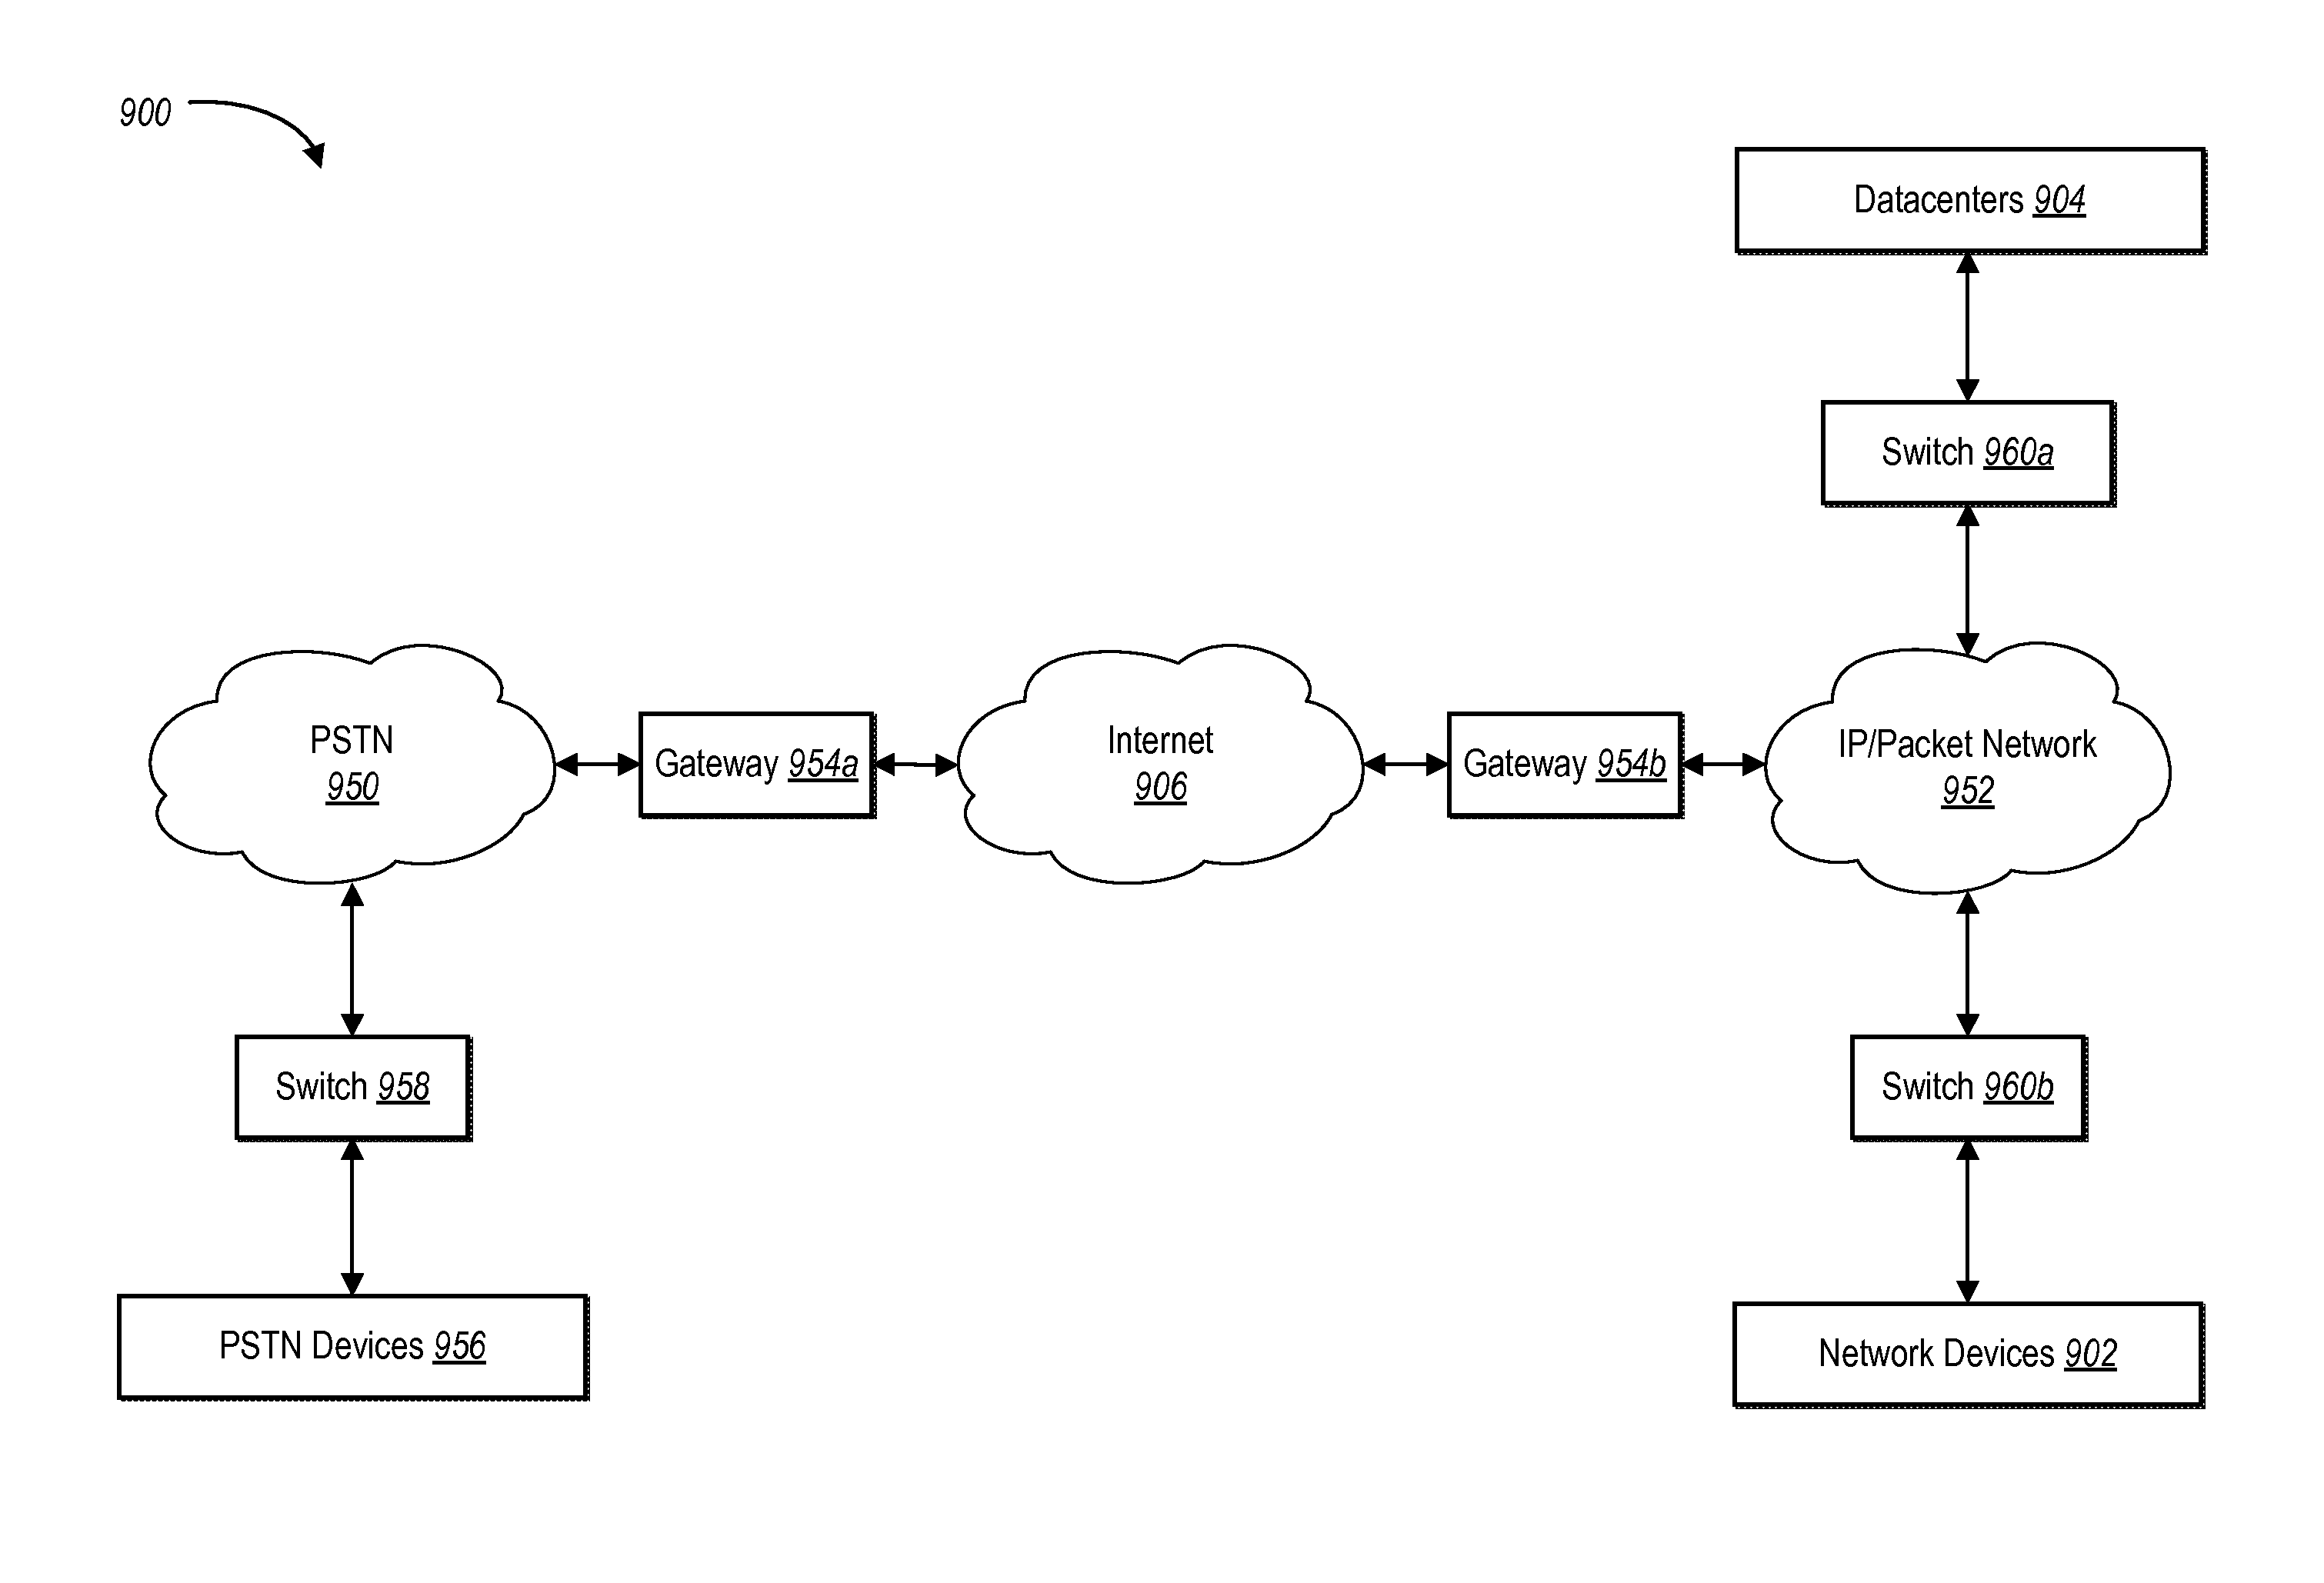 Dynamically associating a datacenter with a network device